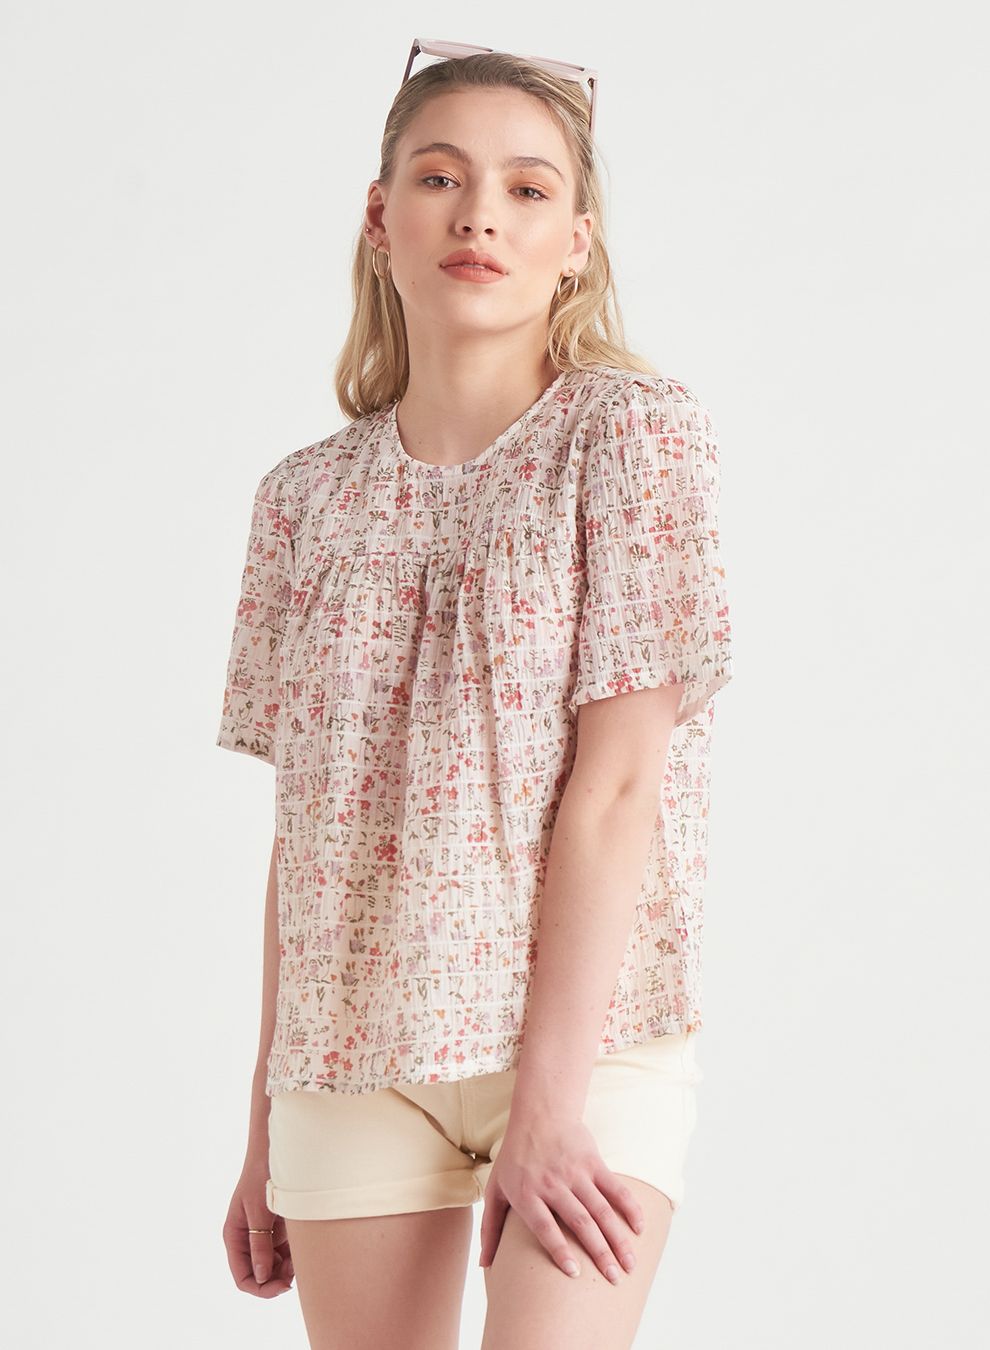 DEX Relaxed Fit Crinkled Top